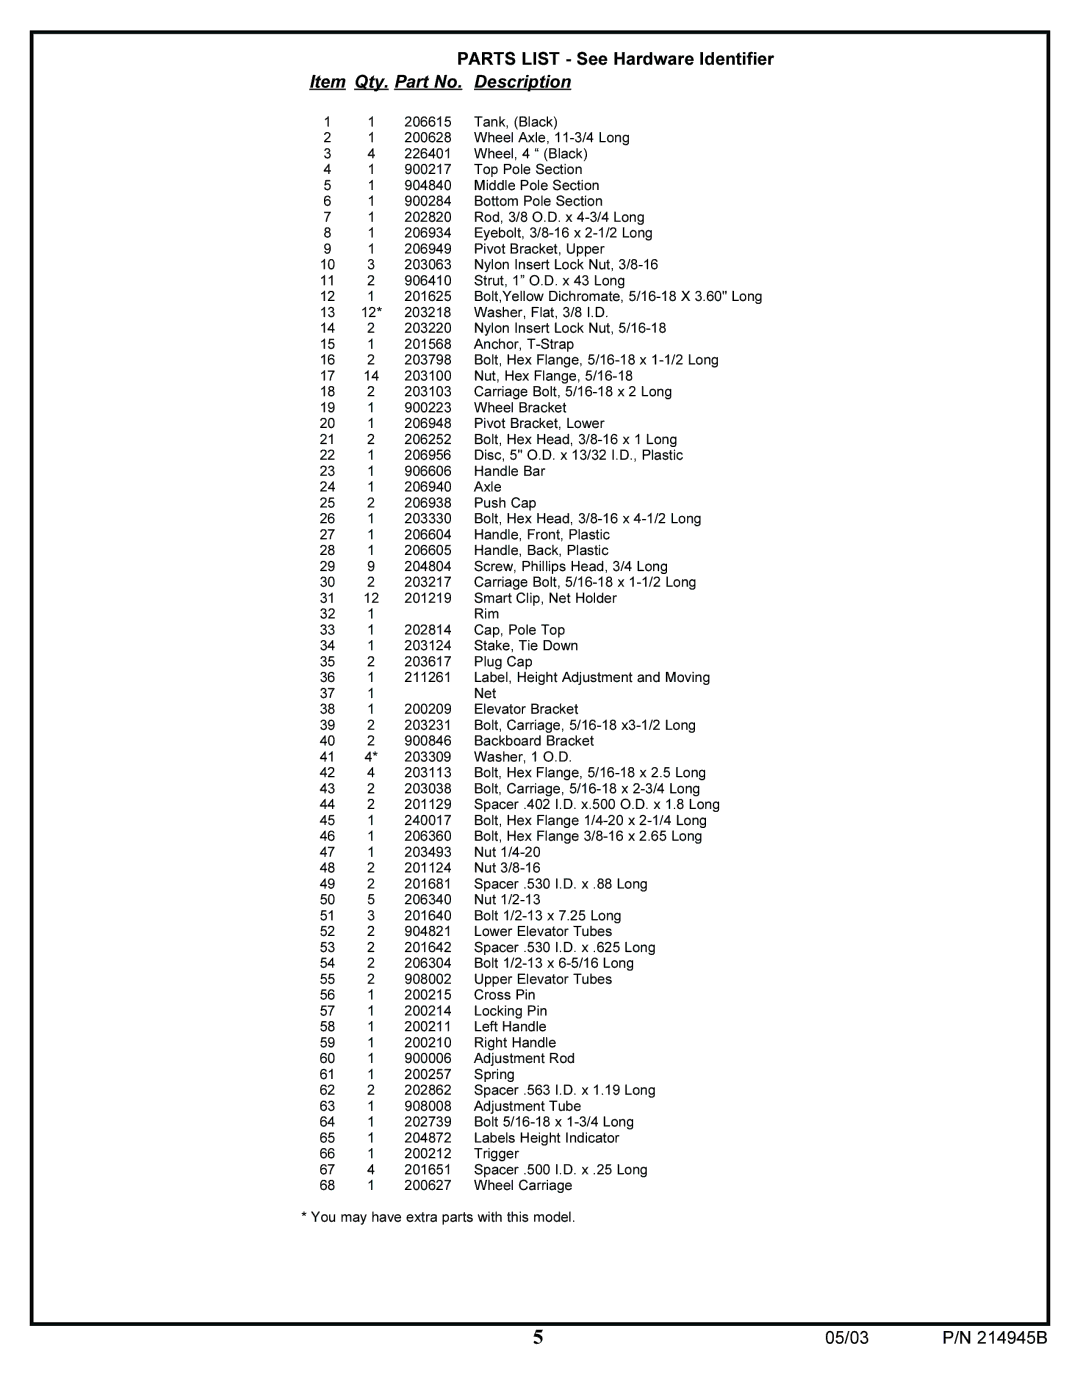 Huffy AWLH4030 manual Parts List See Hardware Identifier 